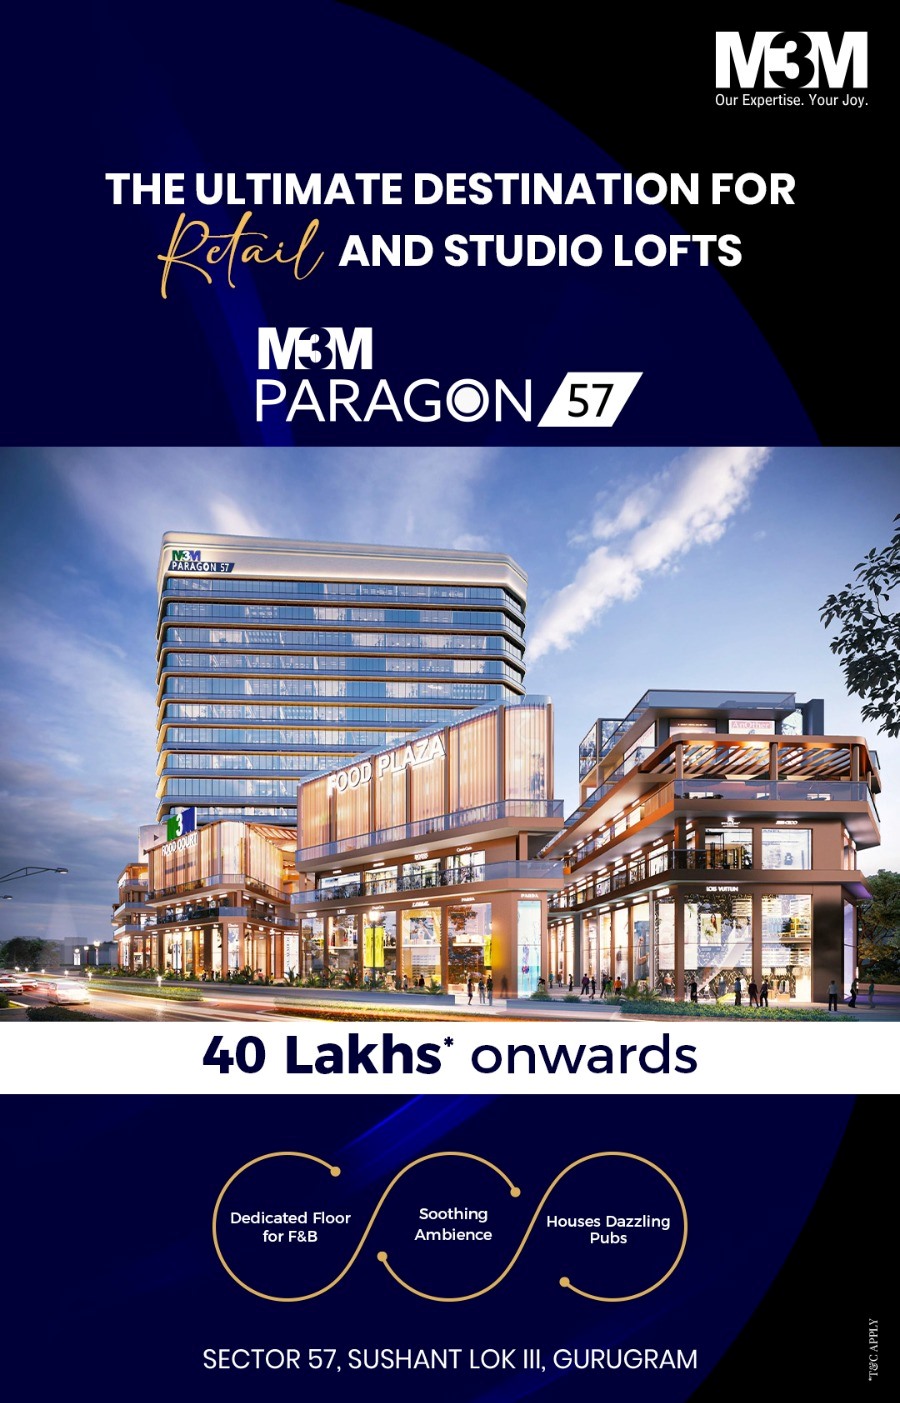 Introducing M3M Paragon A perfect blend of retail & studio lofts in Sector 57, Gurgaon Update